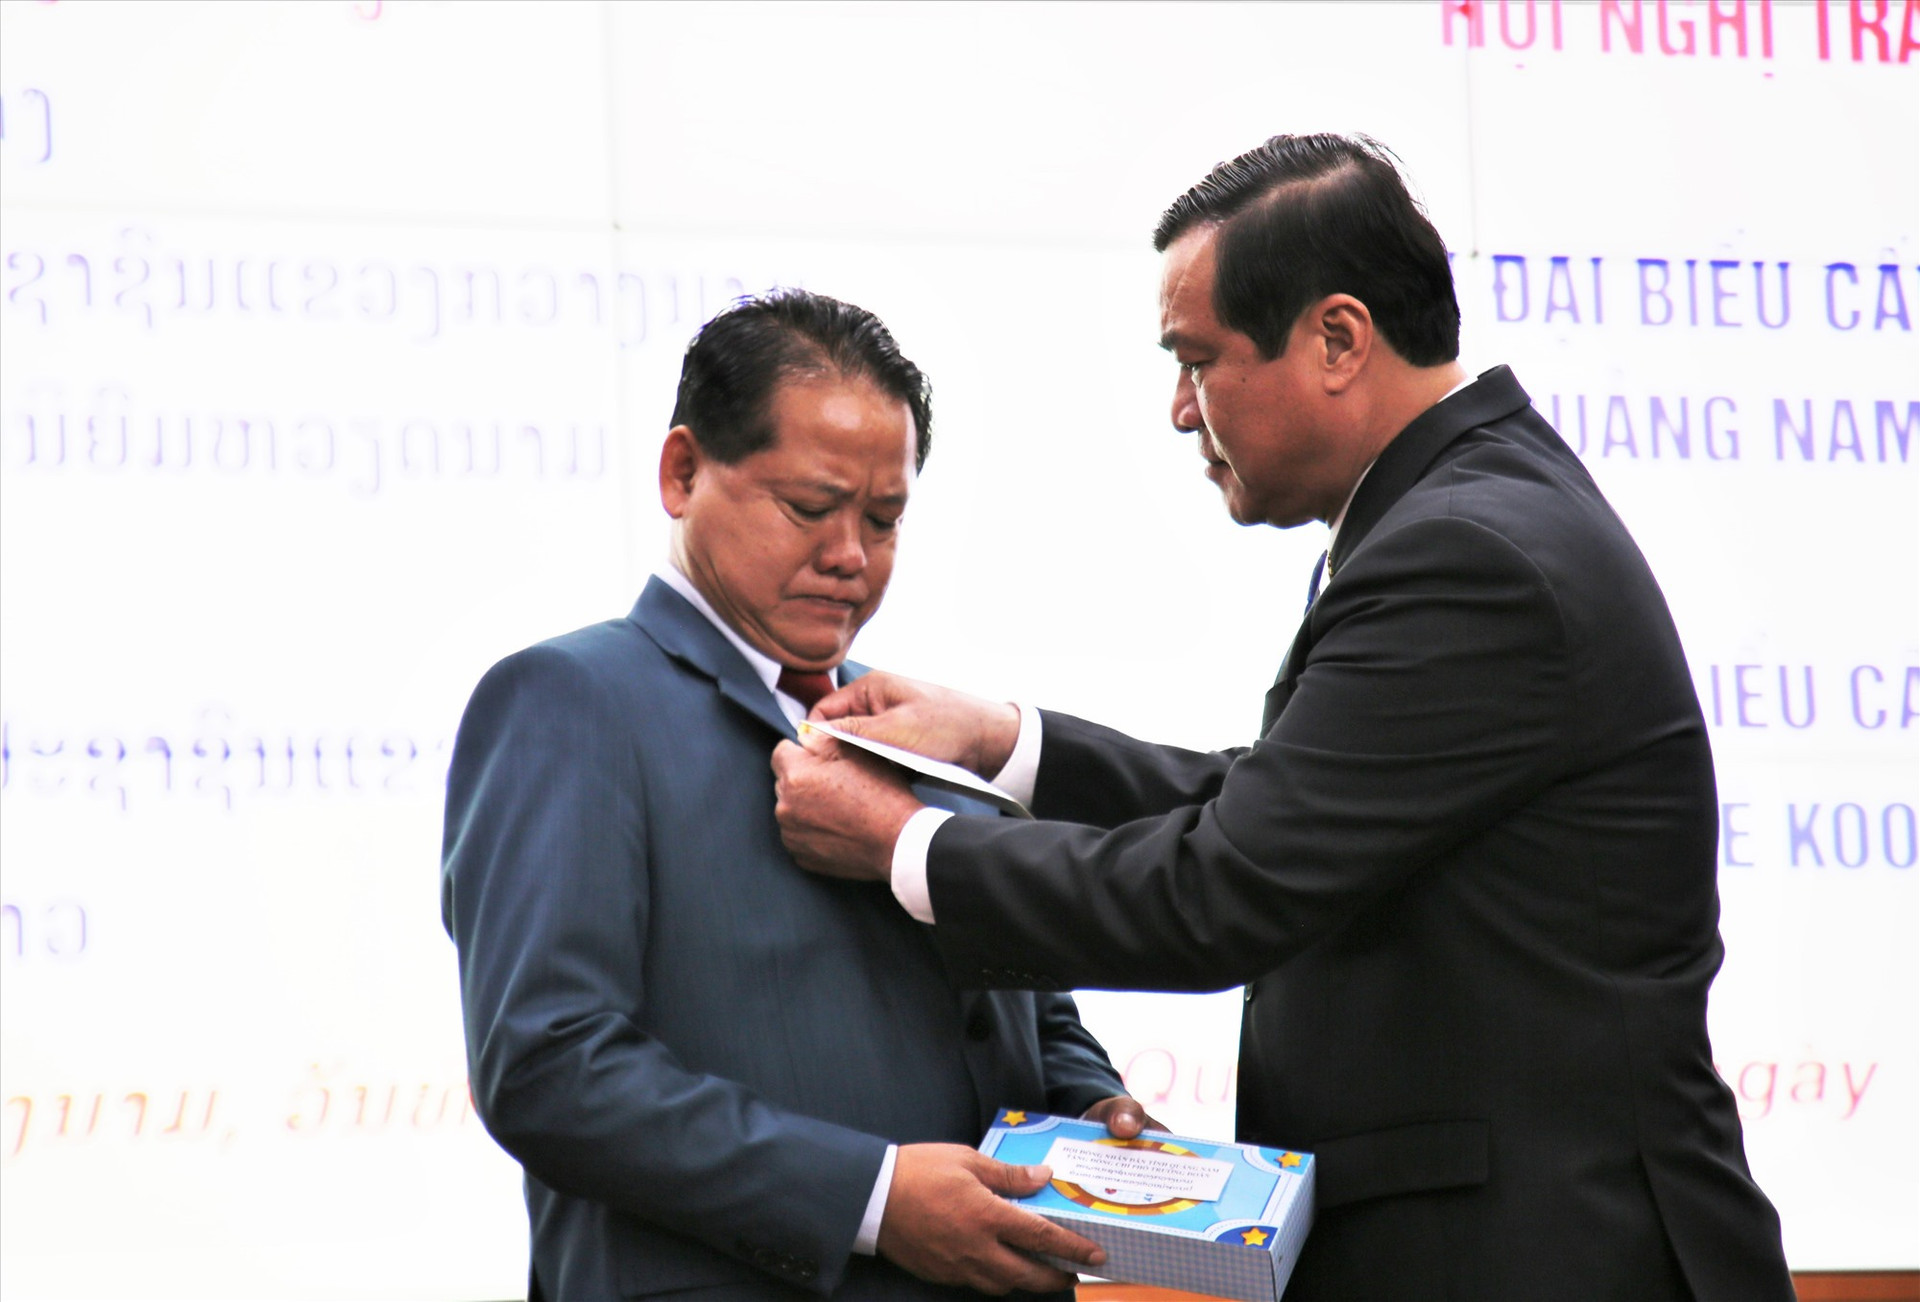 Phan Viet Cuong helps a delegate from Sekong province wear the Quang Nam- Sekong friendship logo.